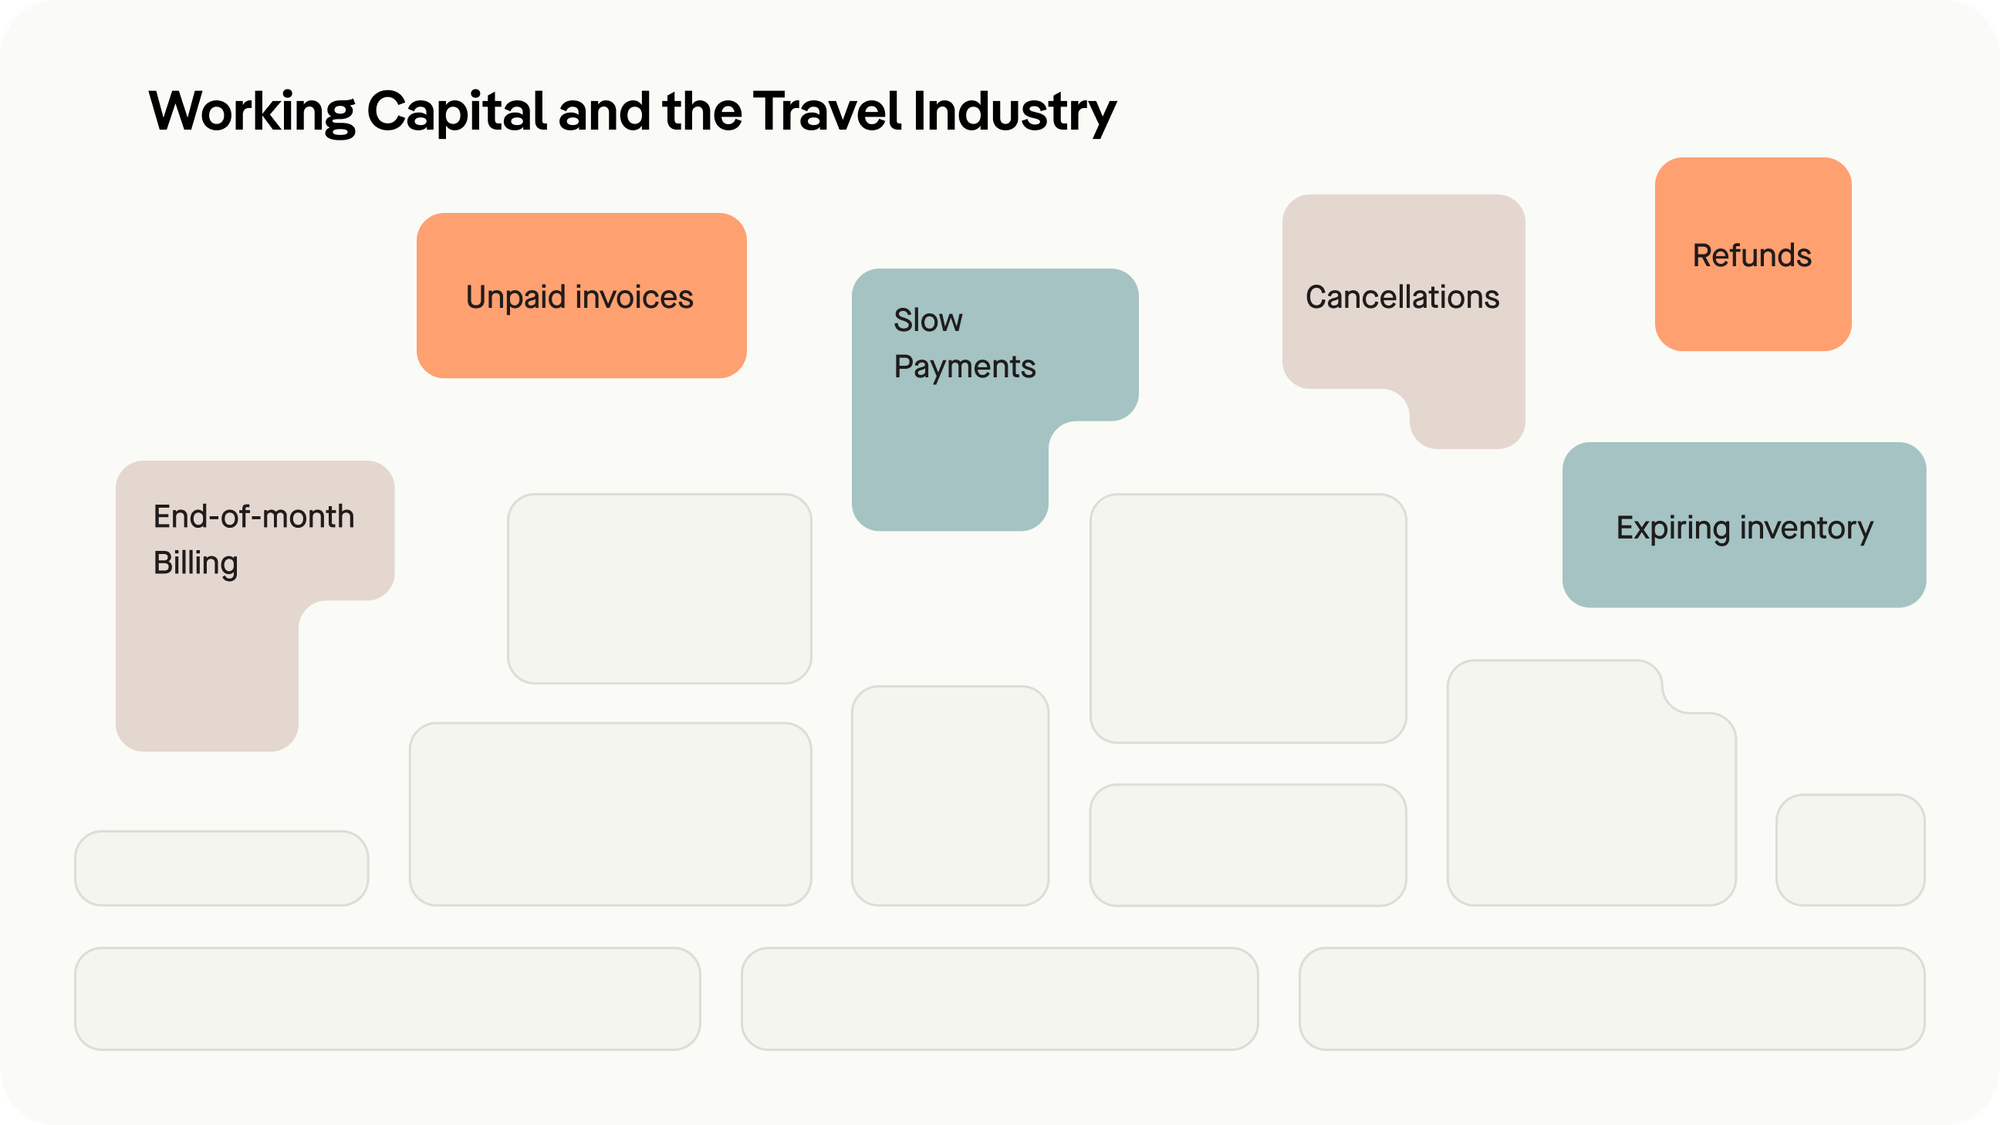 How working capital affects the travel industry